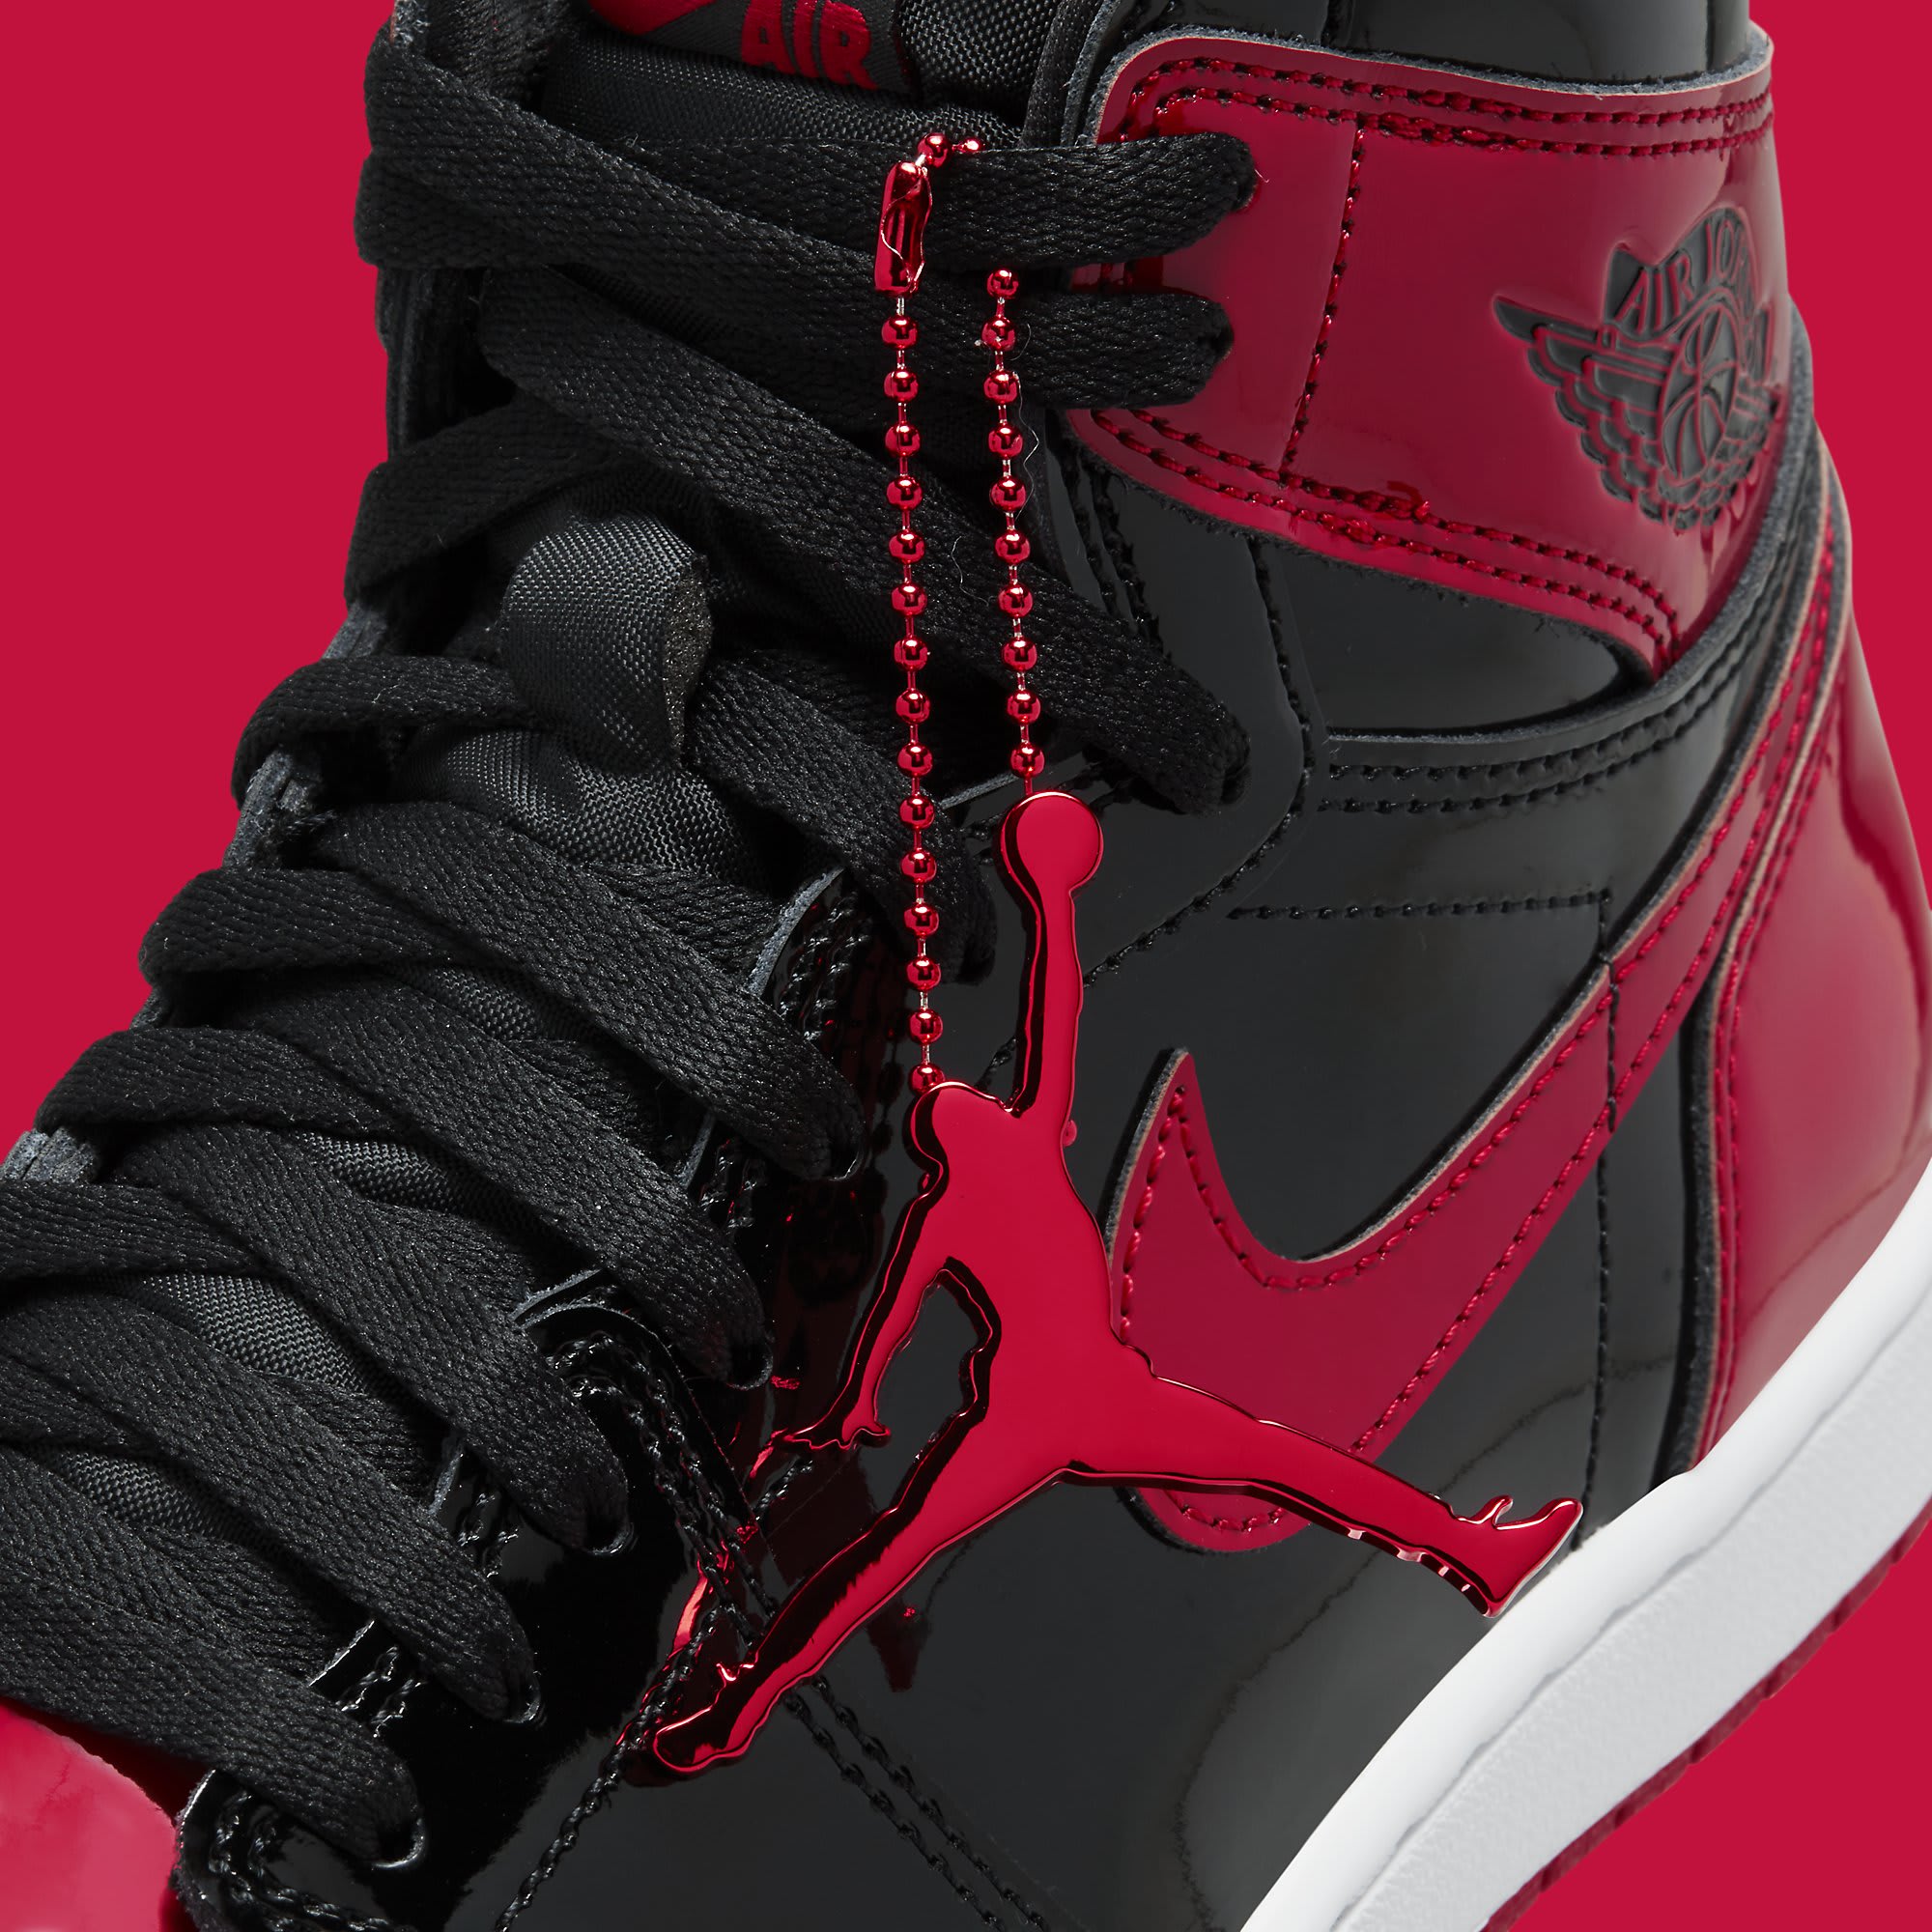 Air Jordan 1 I Bred Patent Leather Release Date 555088-063 Hang Tag